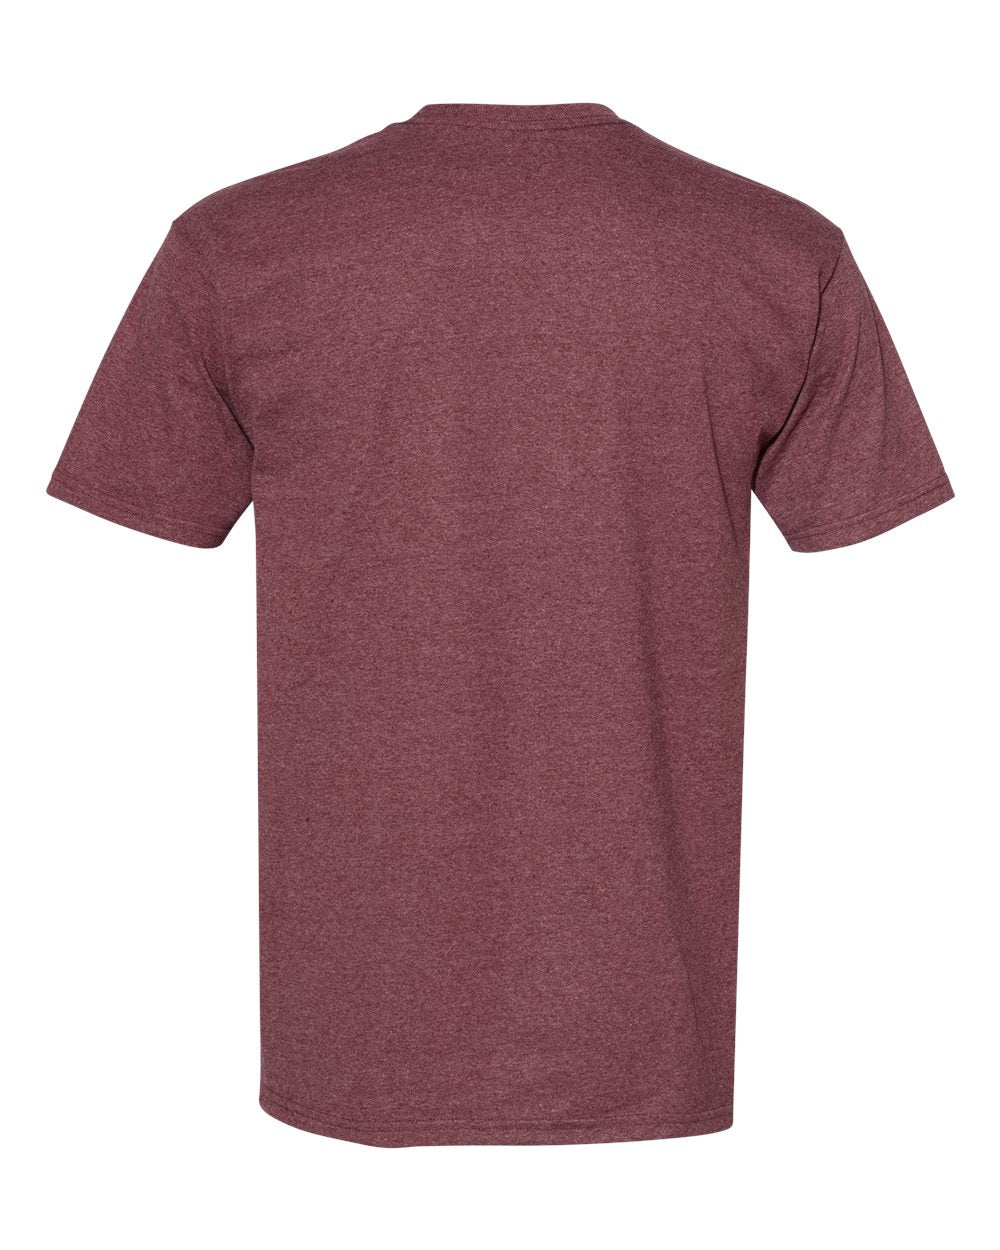 American Apparel Midweight Cotton Unisex Tee 1701 #color_Heather Burgundy